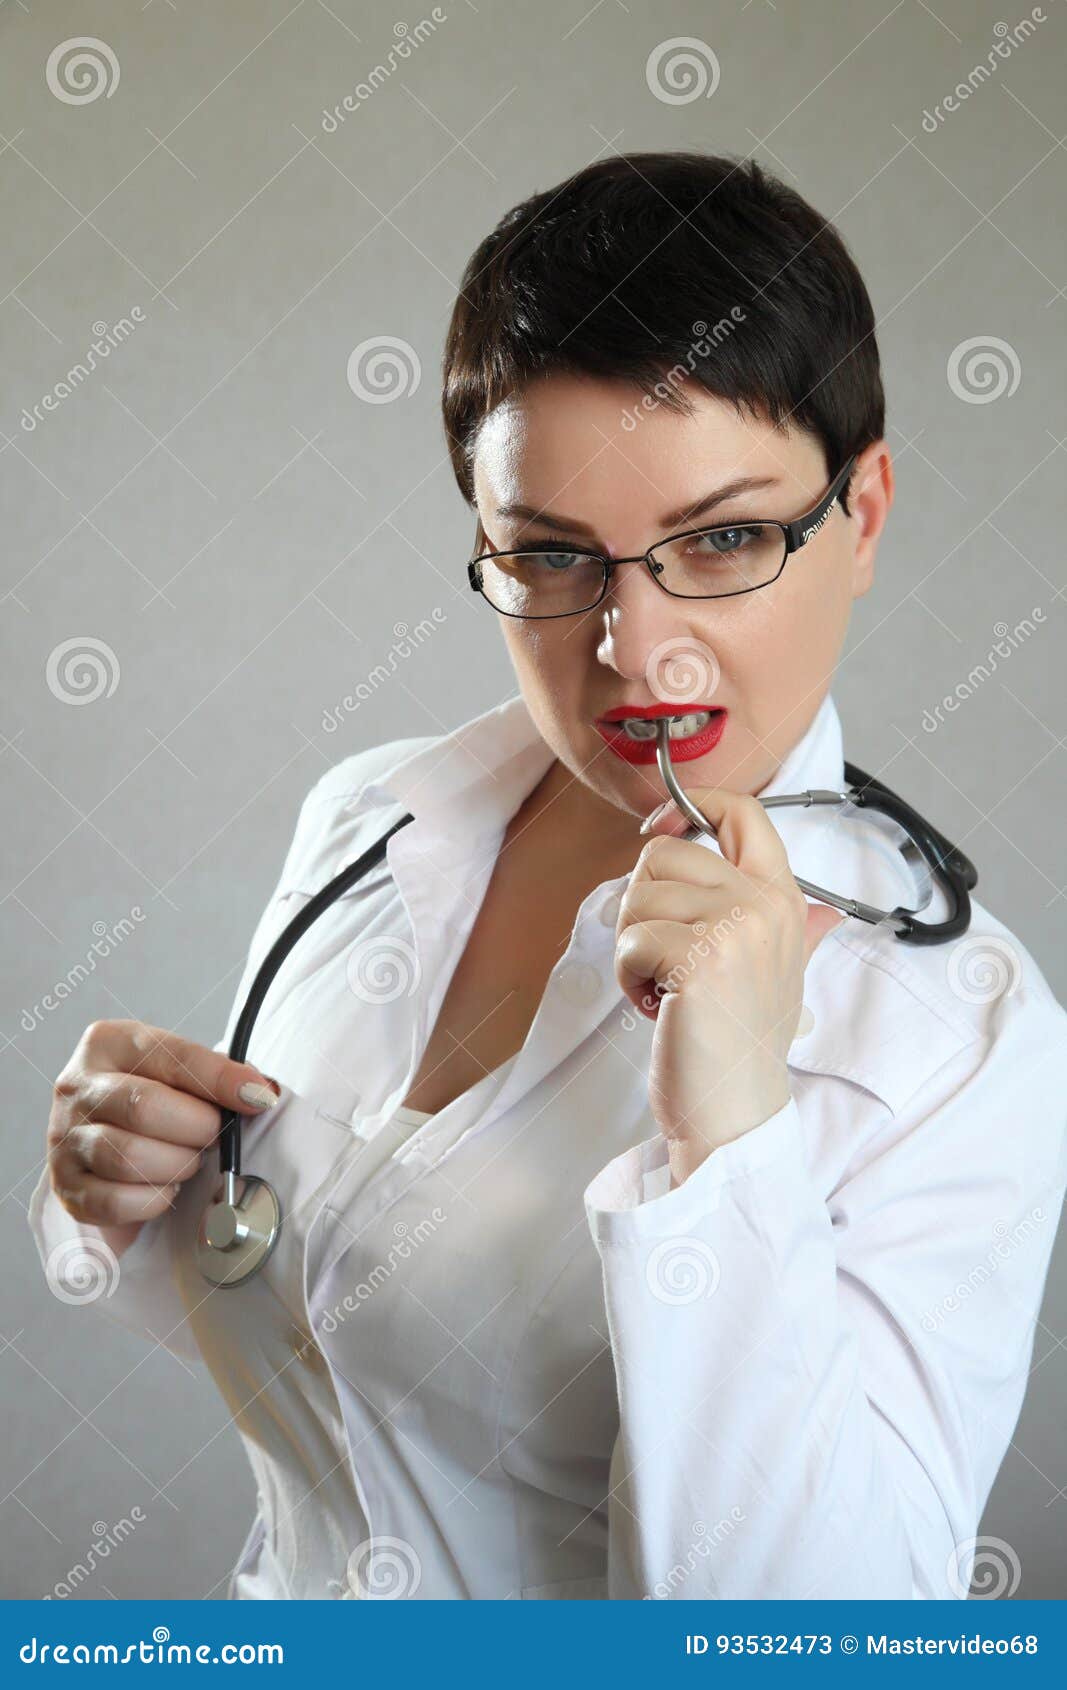 Portrait Of A Beautiful And Female Doctor In A Hospital Stock Image Image Of Exam Food 93532473